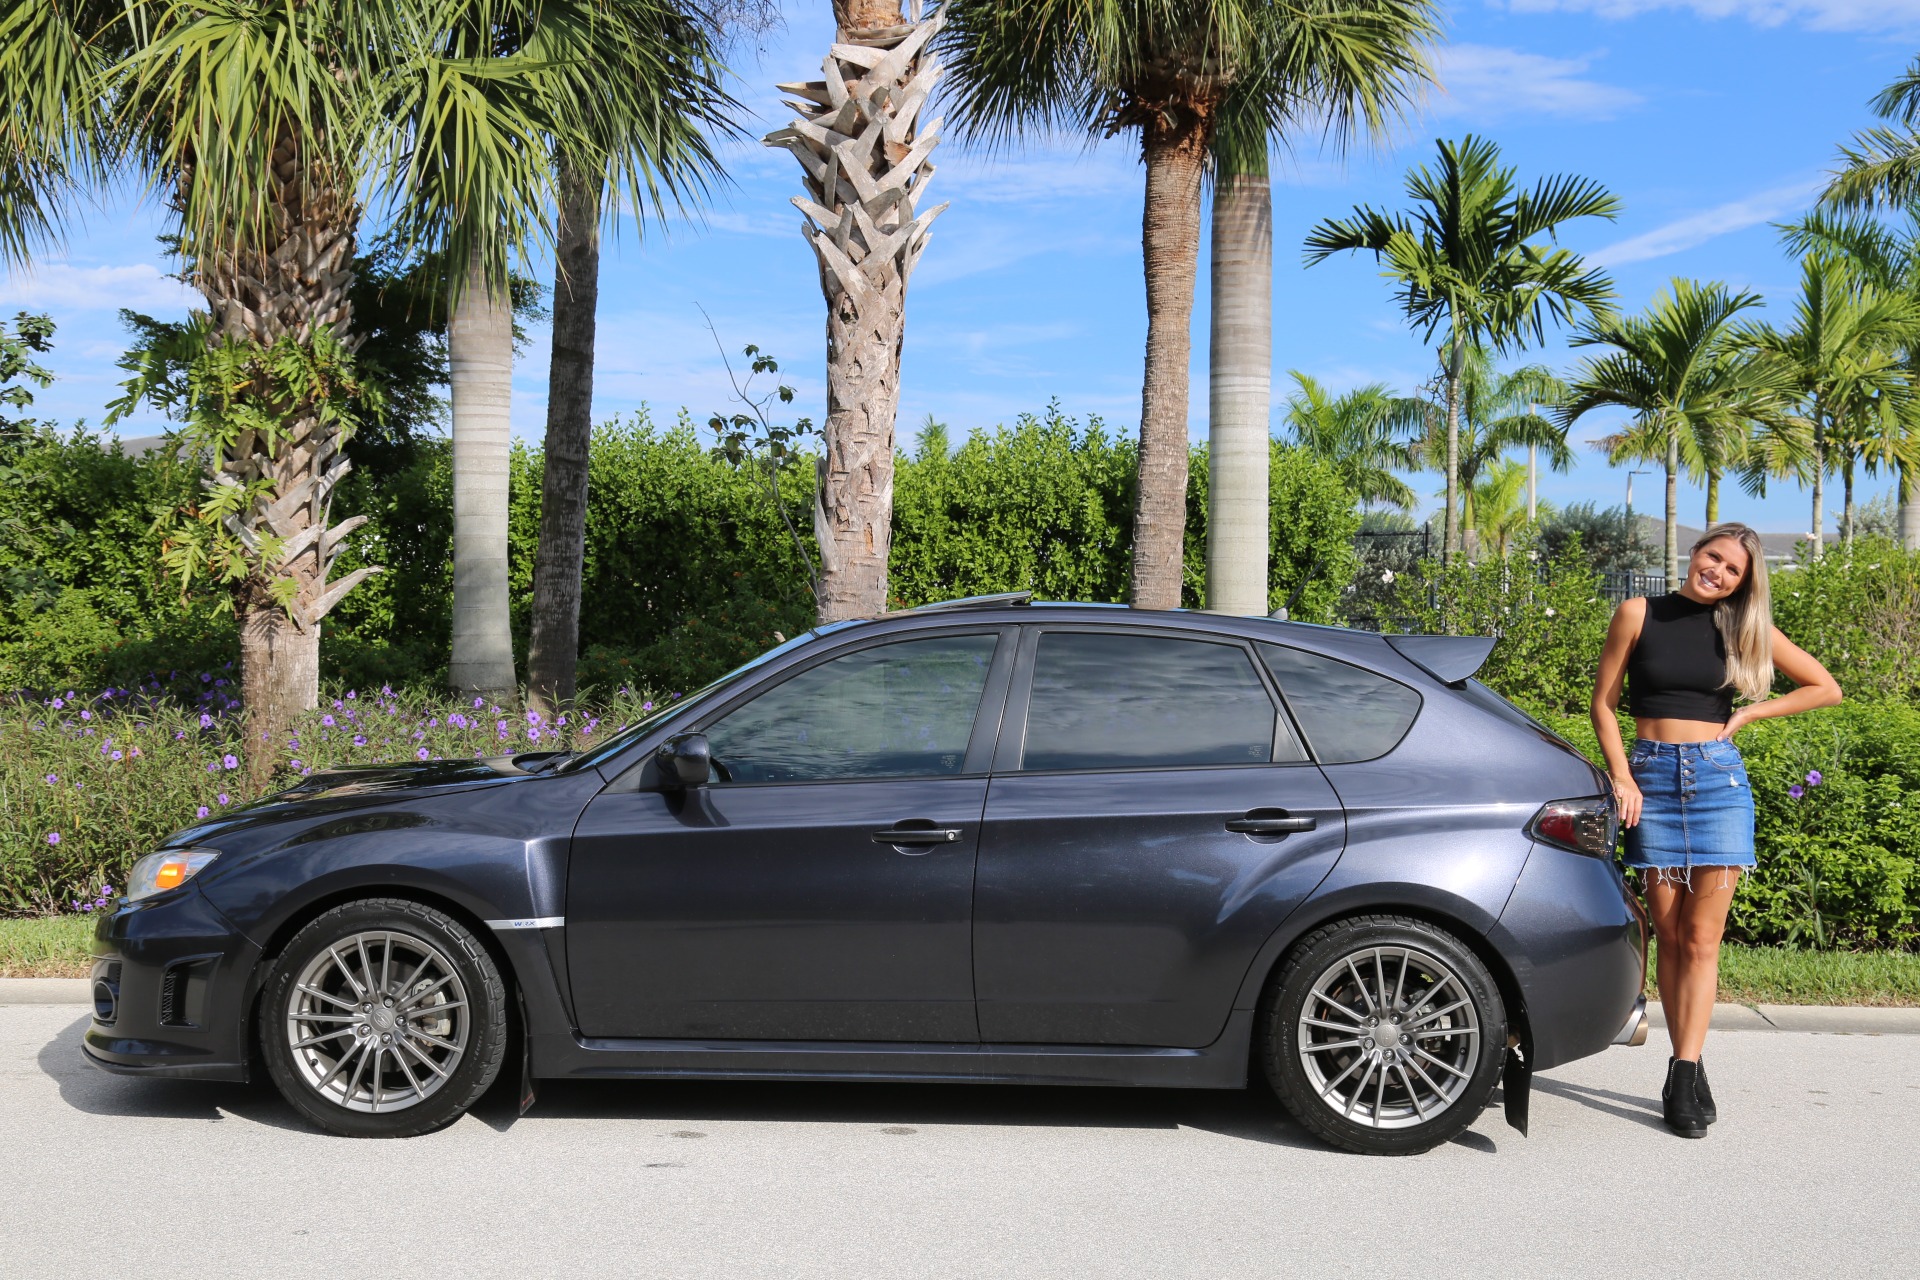 Used 2013 Subaru Impreza WRX Premium Hatch for sale Sold at Muscle Cars for Sale Inc. in Fort Myers FL 33912 2